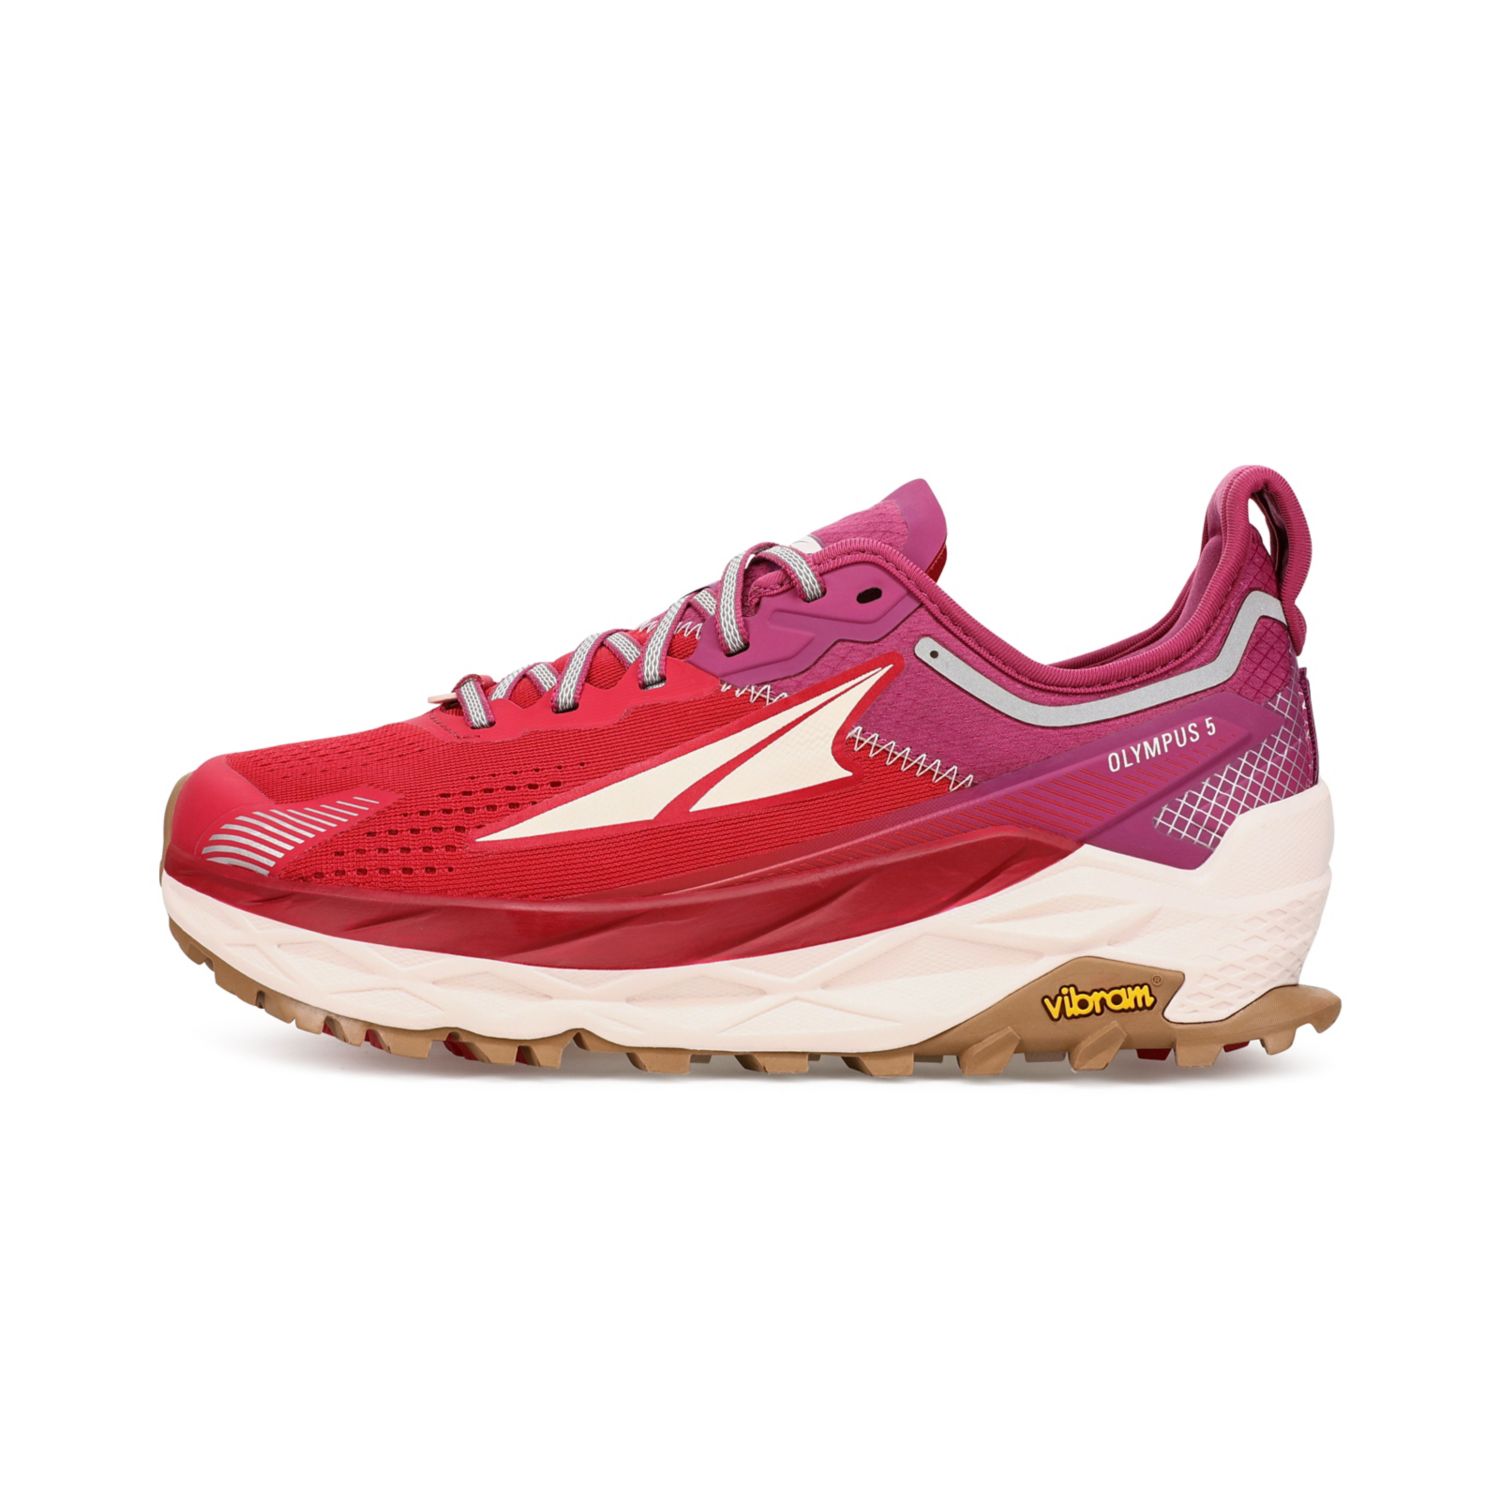 Red / Purple Altra Olympus 5 Women's Trail Running Shoes | Ireland-32907469